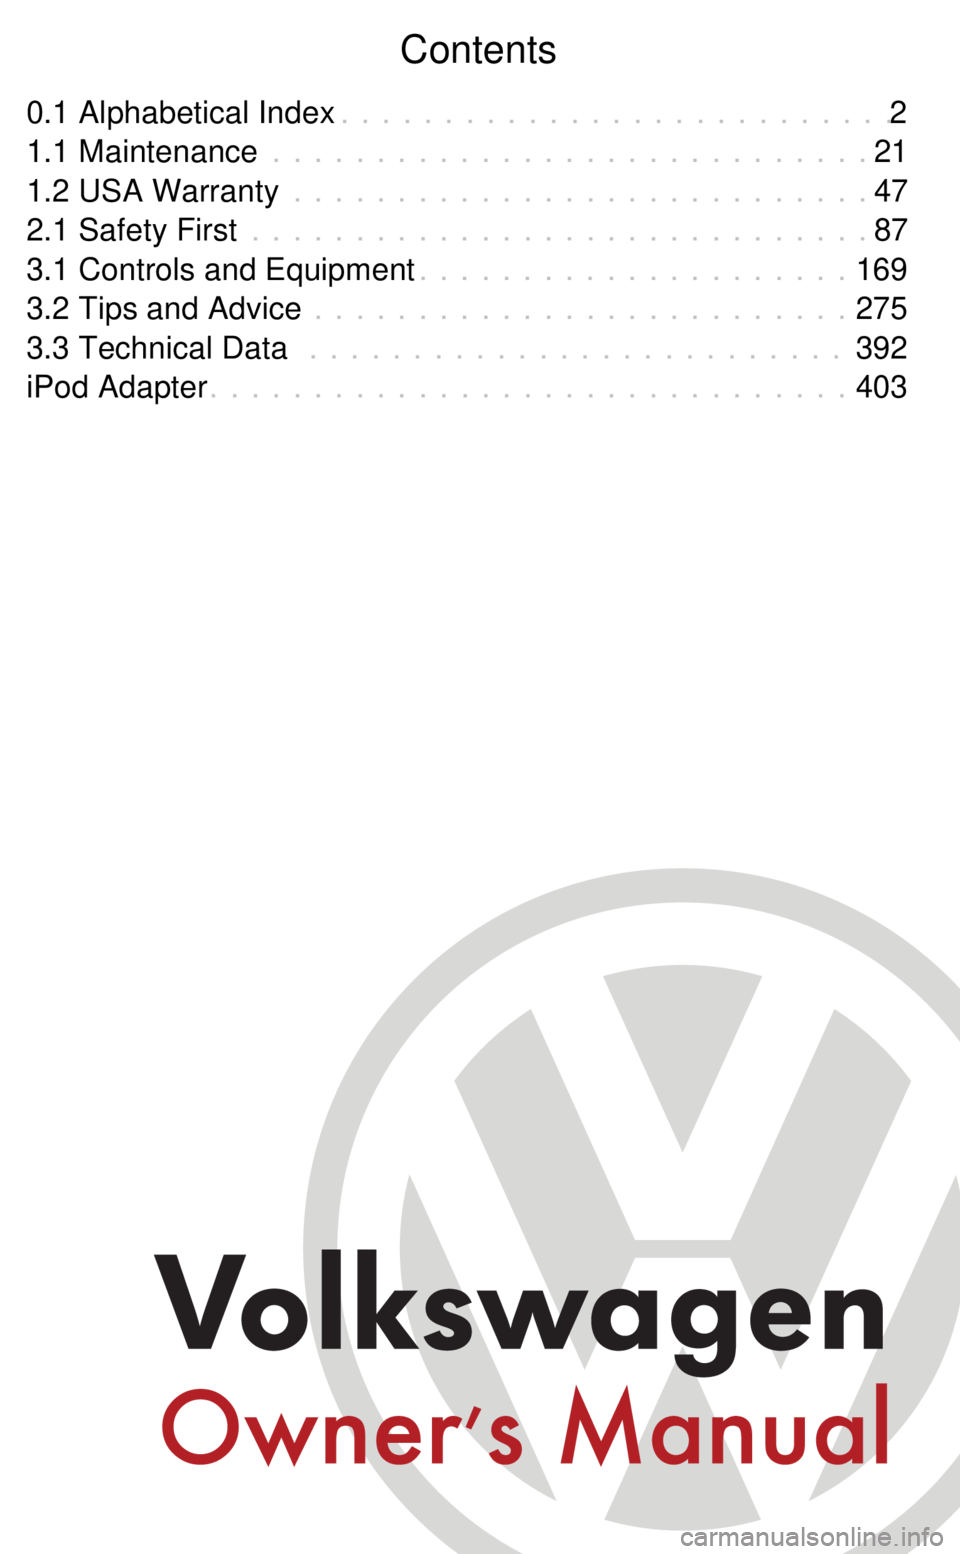 VOLKSWAGEN GOLF 2005  Owners Manual Contents
0.1 Alphabetical Index 2
. . . . . . . . . . . . . . . . . . . . . . . . . . .
1.1 Maintenance 21
. . . . . . . . . . . . . . . . . . . . . . . . . . . . .
1.2 USA Warranty 47
. . . . . . . .